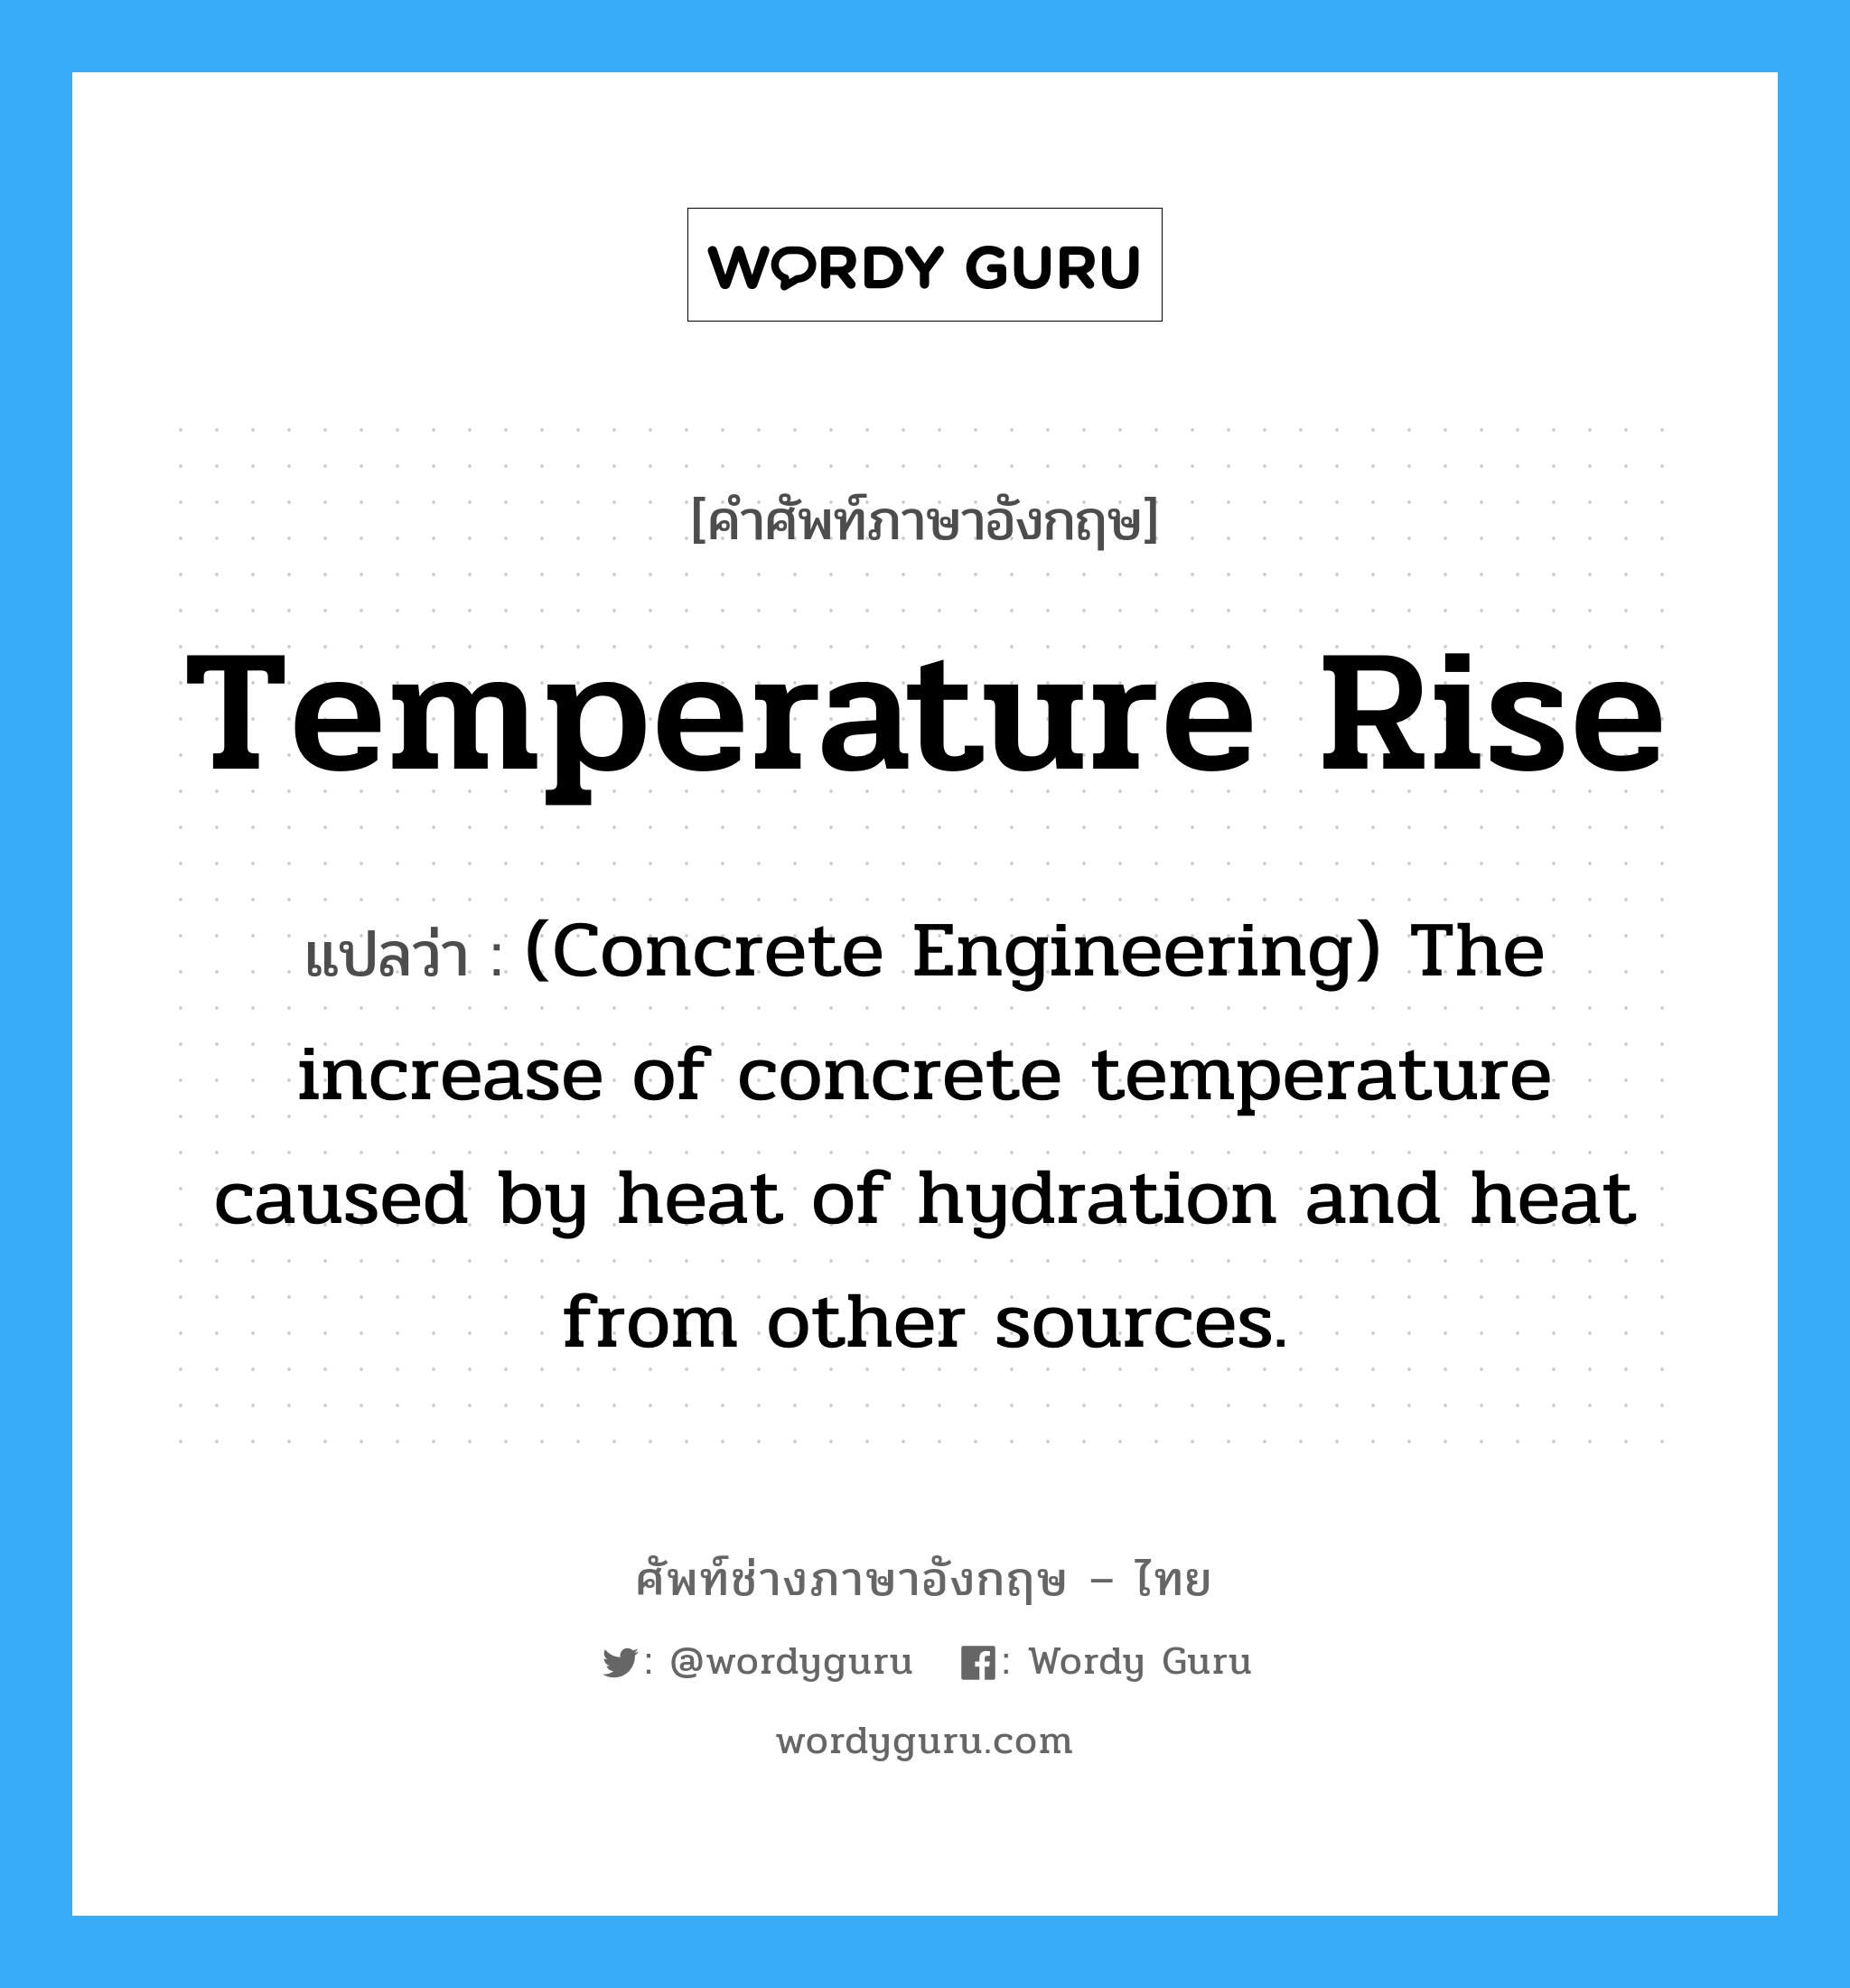 Temperature Rise แปลว่า?, คำศัพท์ช่างภาษาอังกฤษ - ไทย Temperature Rise คำศัพท์ภาษาอังกฤษ Temperature Rise แปลว่า (Concrete Engineering) The increase of concrete temperature caused by heat of hydration and heat from other sources.